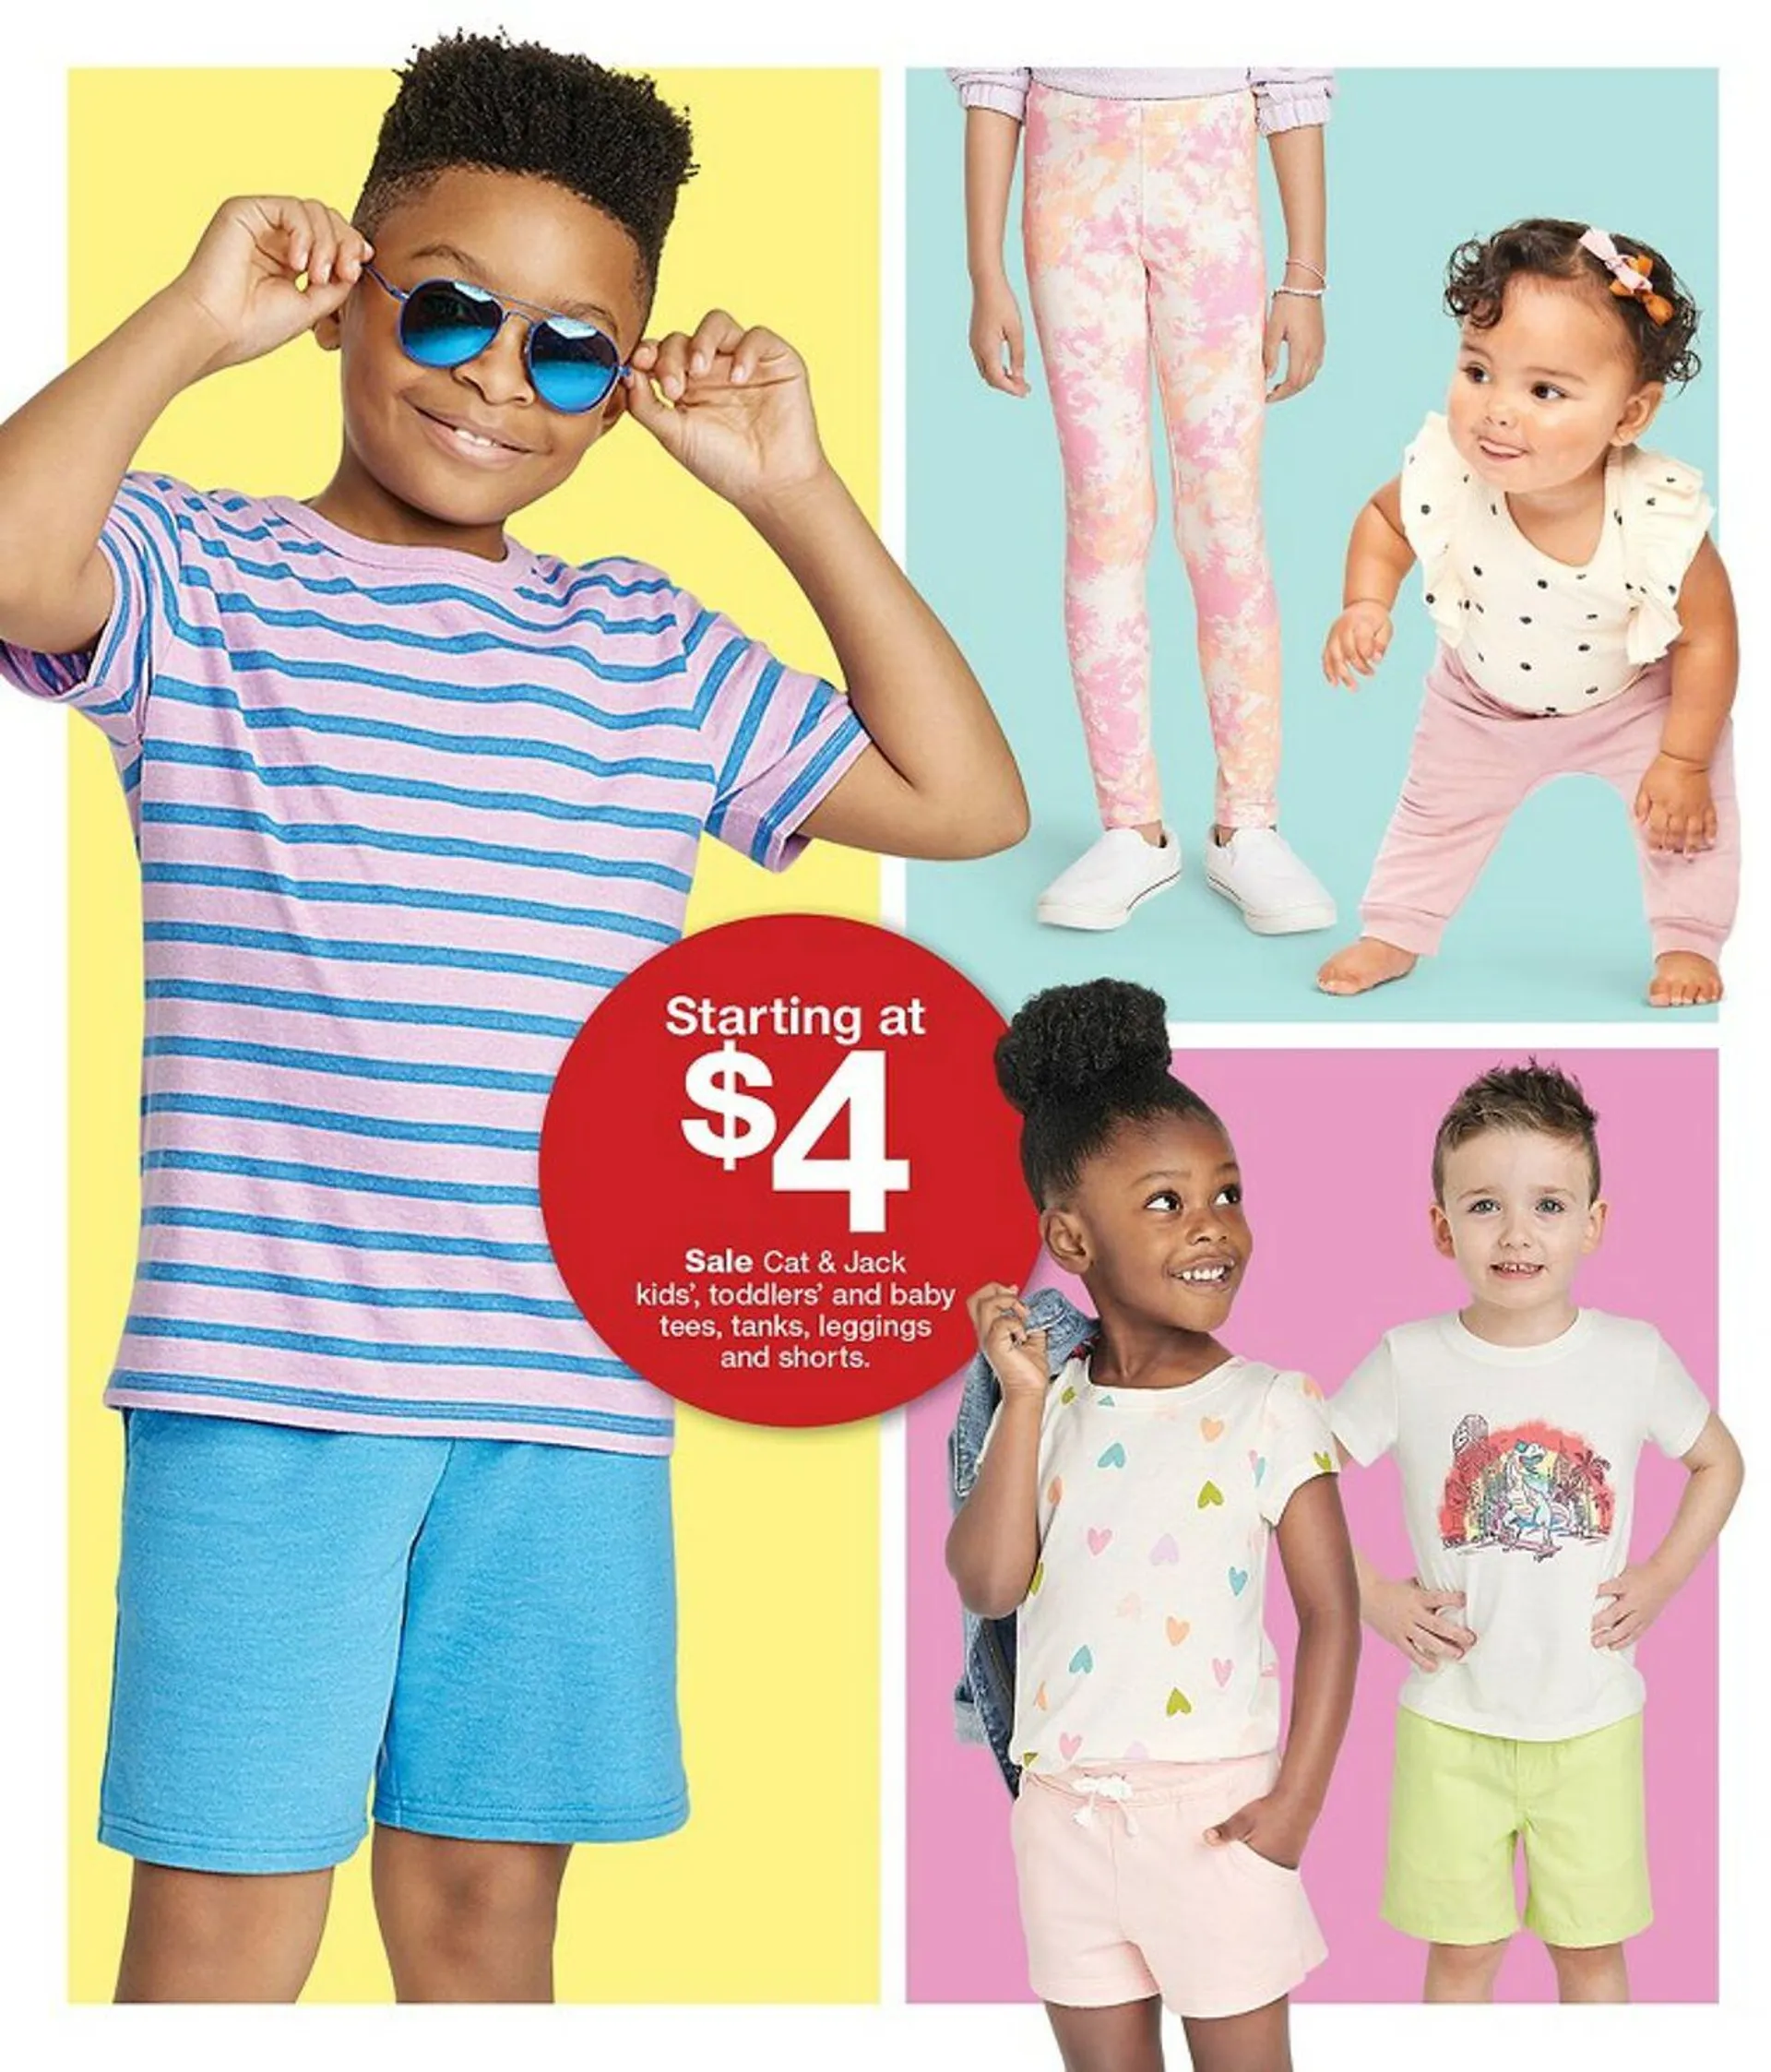 Target Current weekly ad - 2